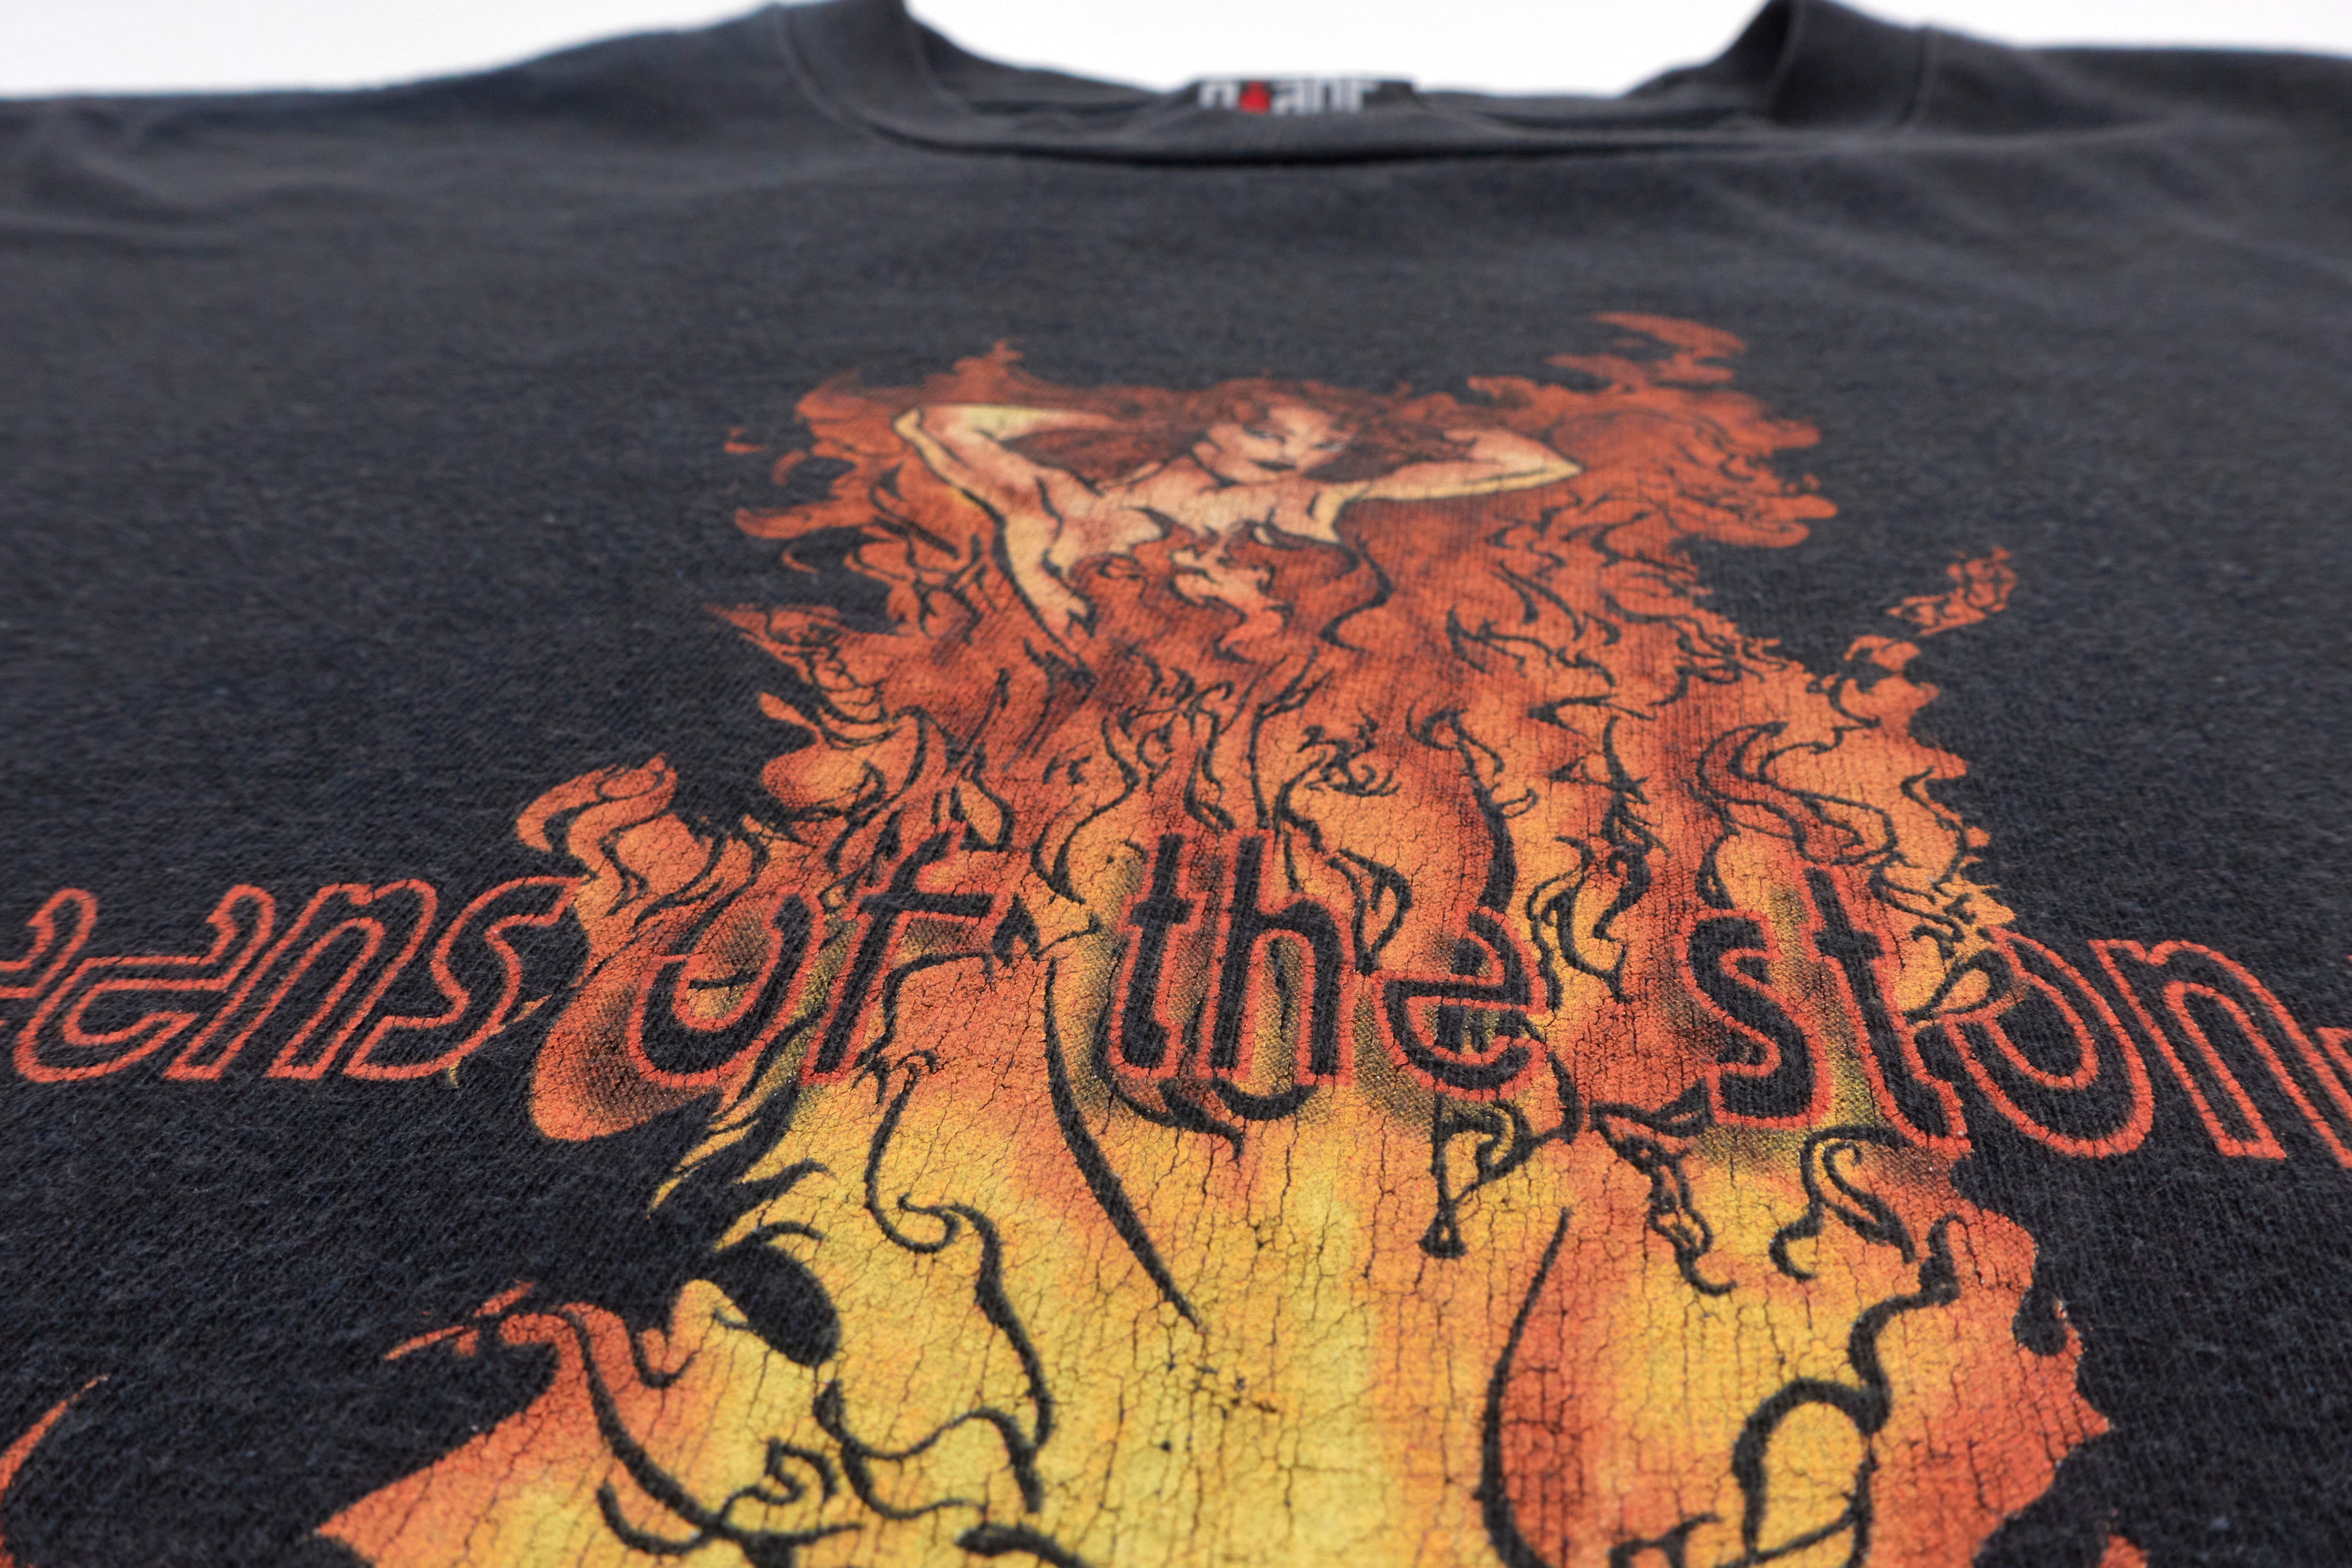 Queens Of The Stone Age – Fire Goddess 90's Tour Shirt Size XL